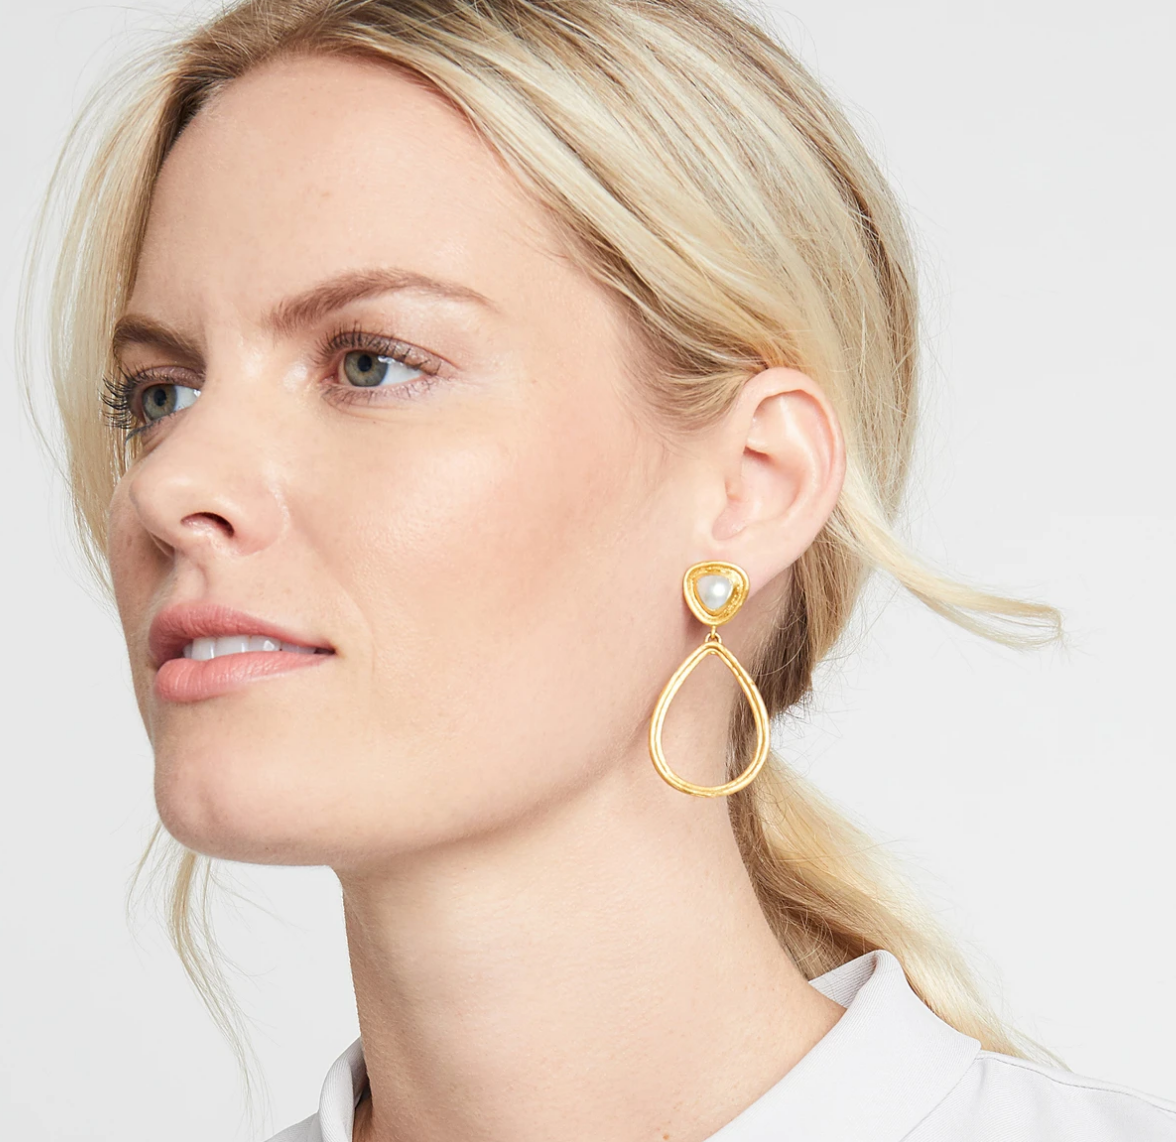 Barcelona Statement Earring Gold Iridescent Clear Crystal Women's Jewelry Julie Vos   